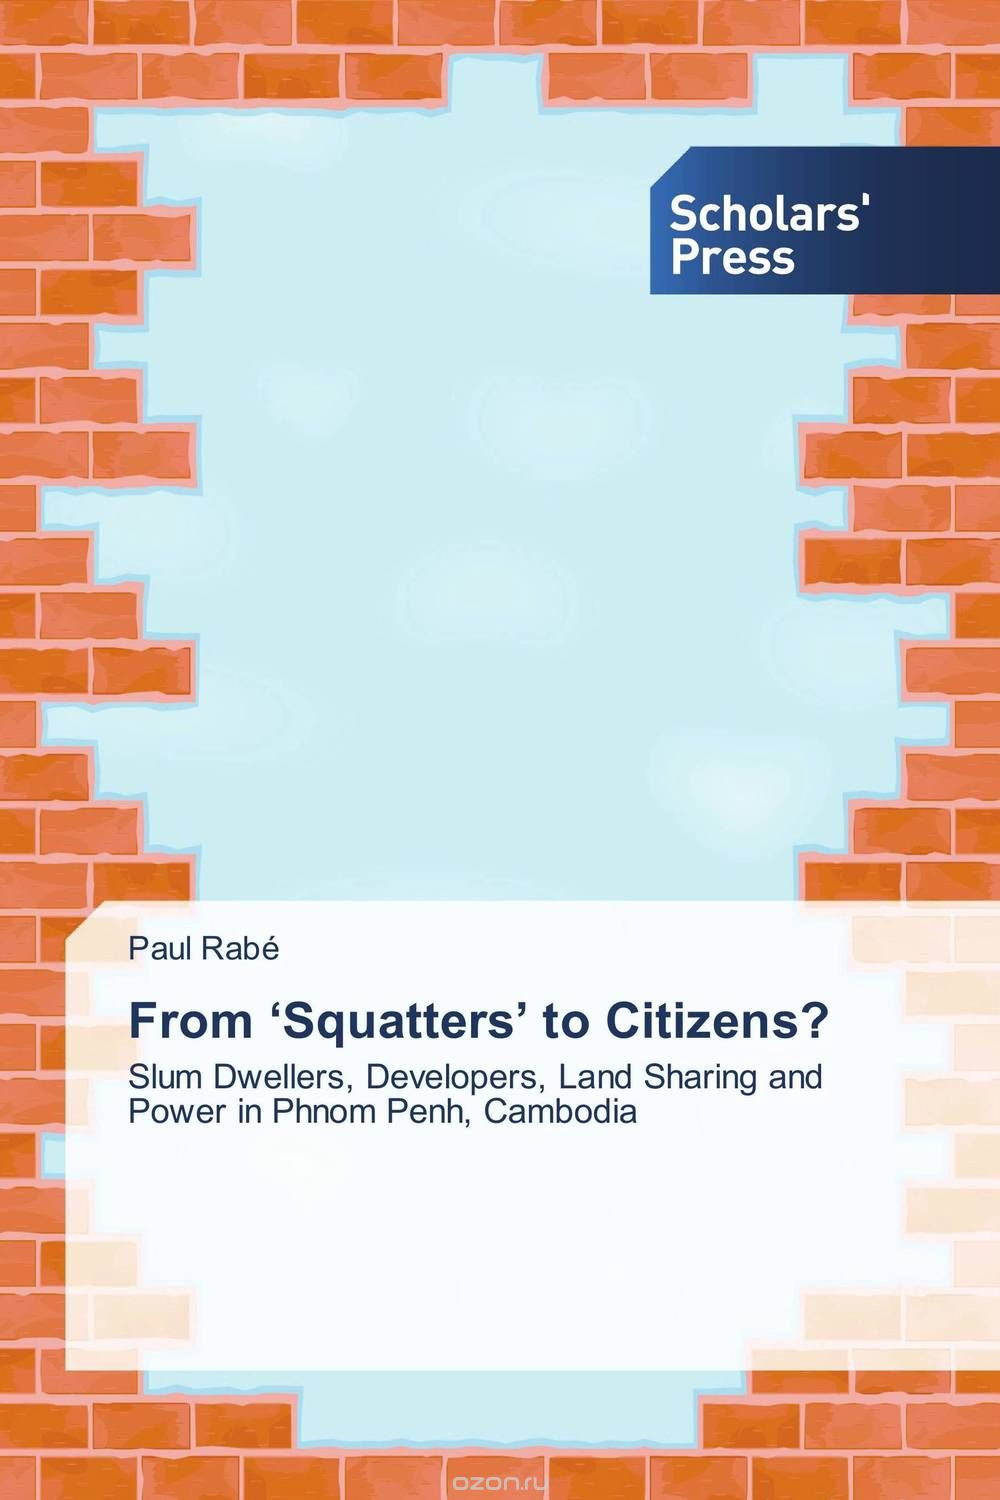 Скачать книгу "From ‘Squatters’ to Citizens?"